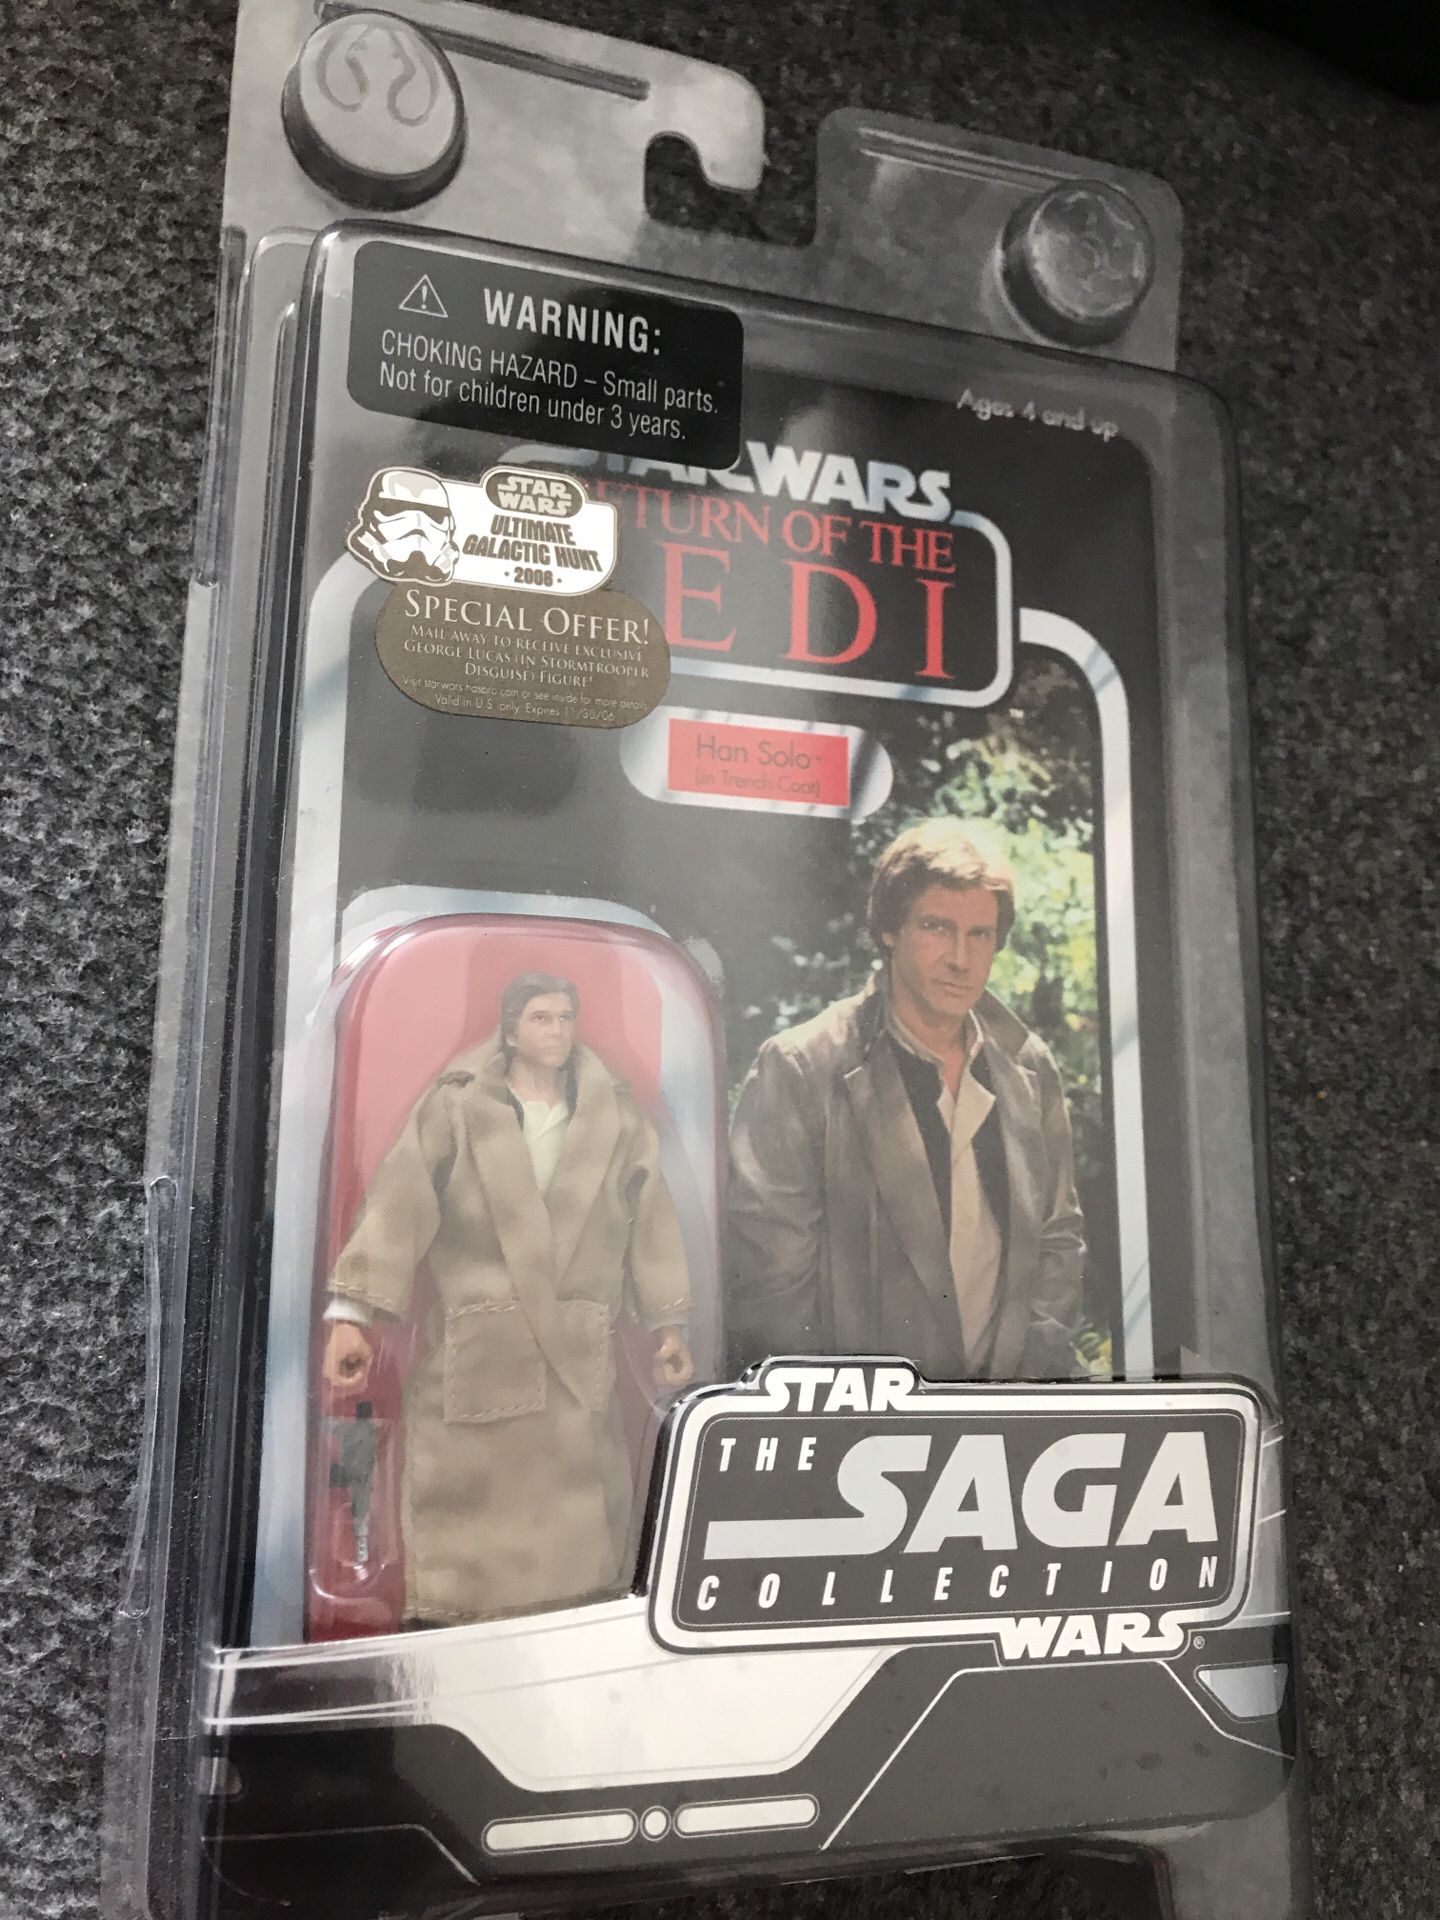 Star Wars Han Solo Return of the Jedi action figure